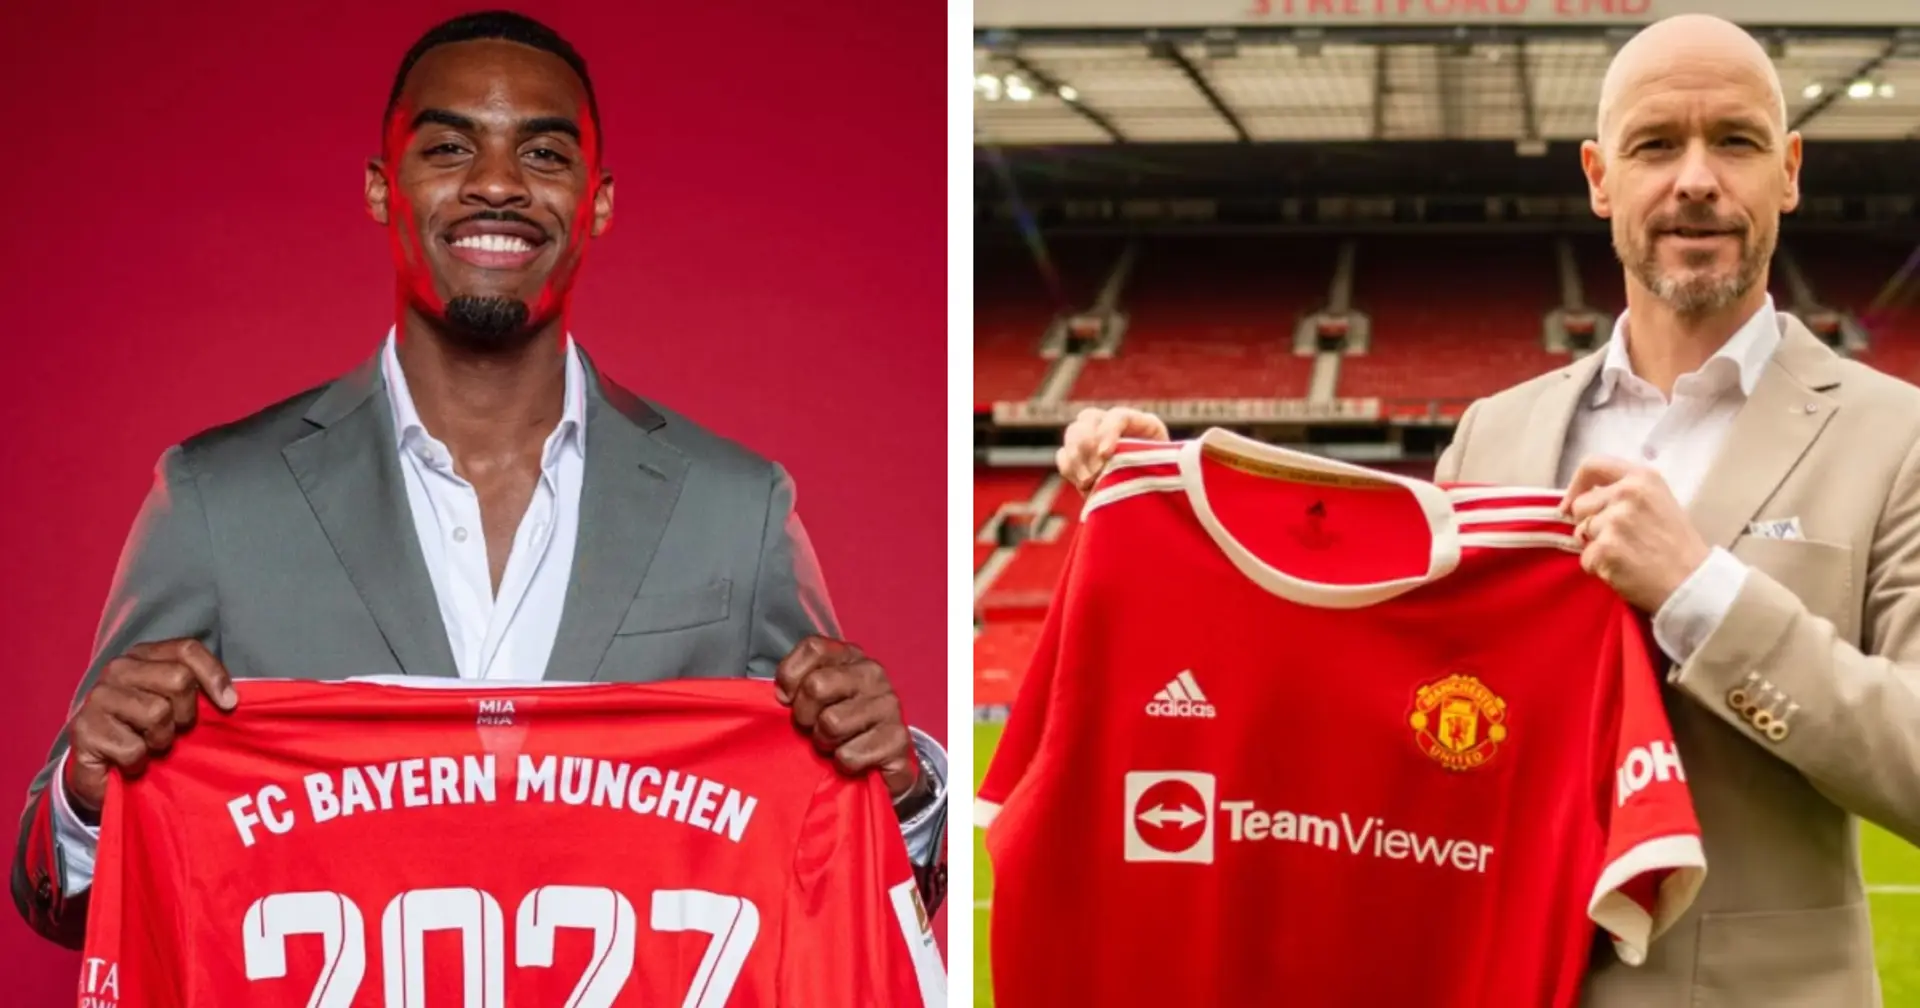 'I already had such a good feeling at Bayern': Ryan Gravenberch explains why he turned down Man United